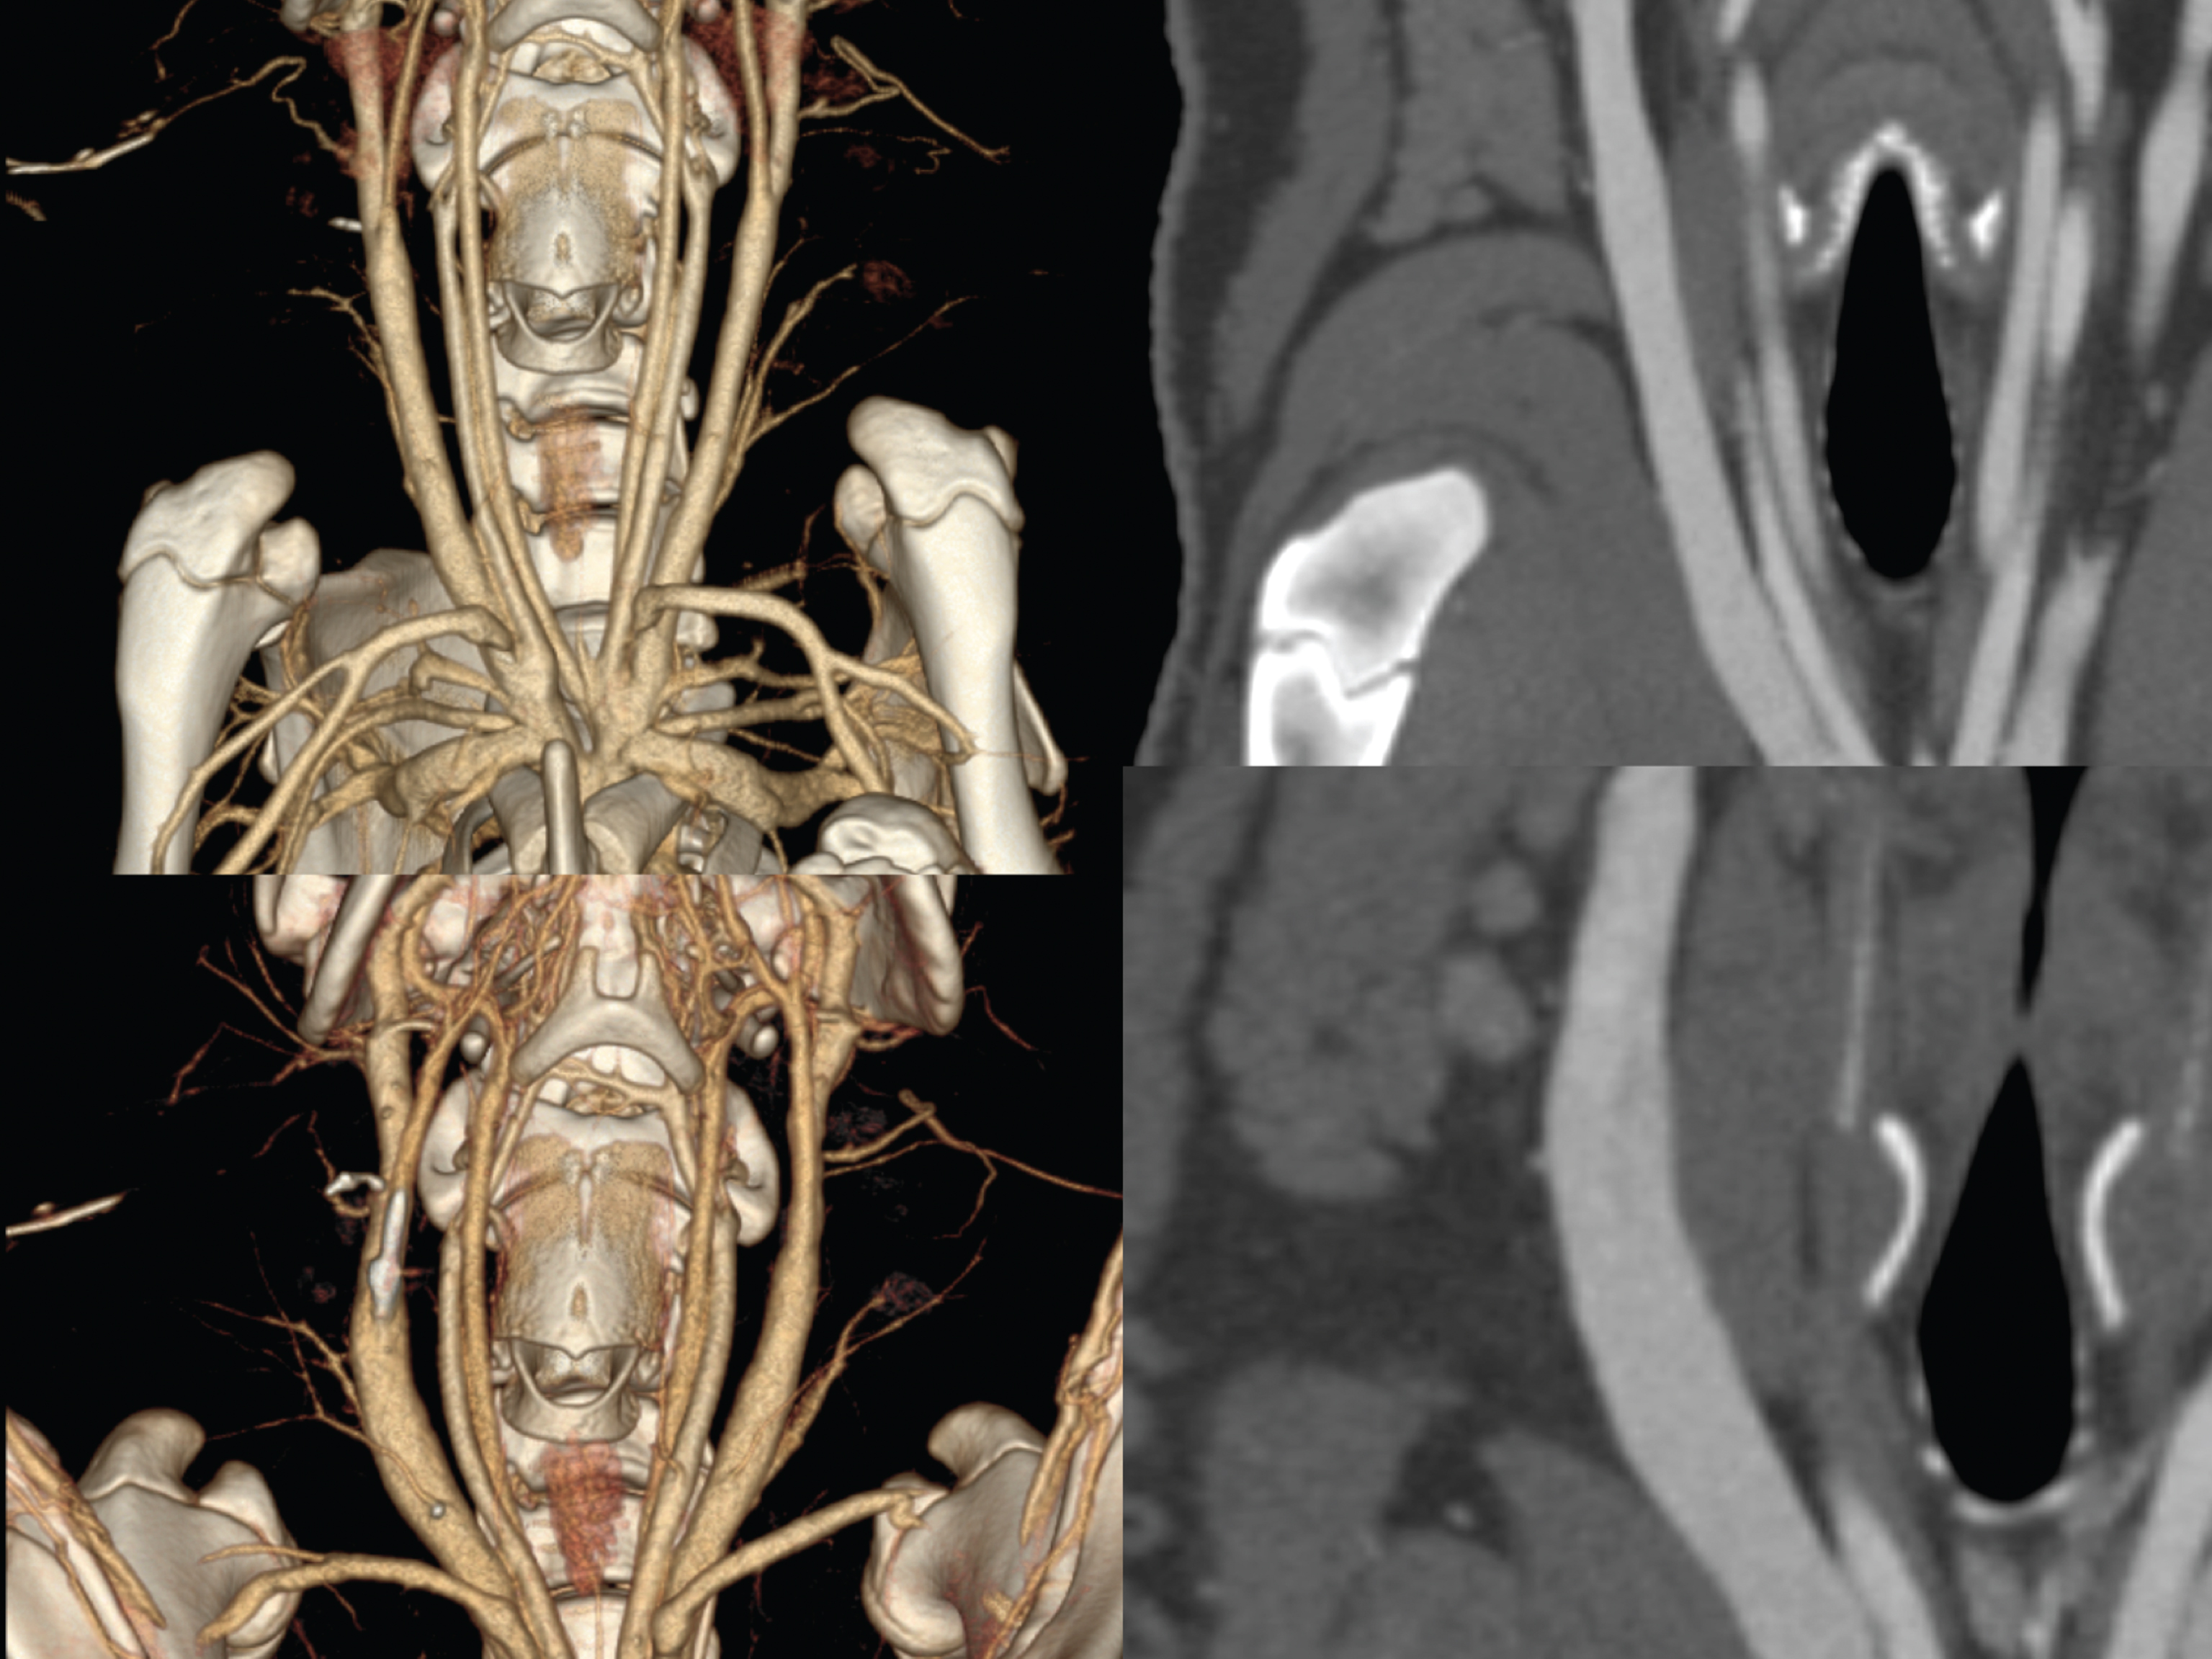 Supine position (upper images) as VRT (left) and MPR (right) compared to prone position (lower images) displayed as VRT and MPR focusing on the external jugular vein.